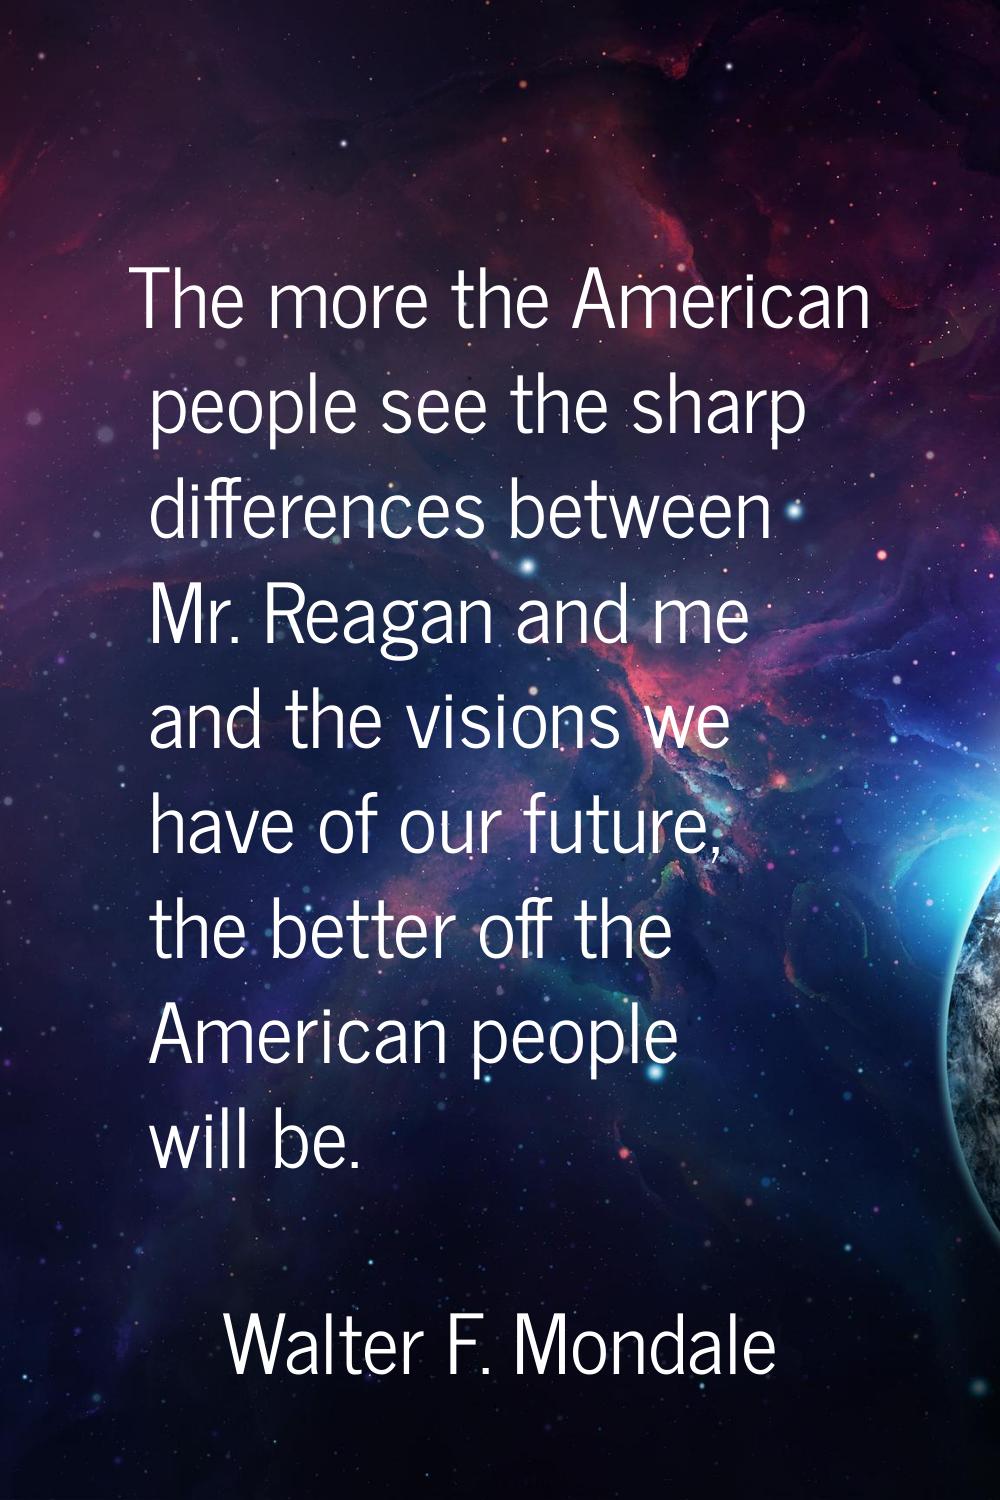 The more the American people see the sharp differences between Mr. Reagan and me and the visions we